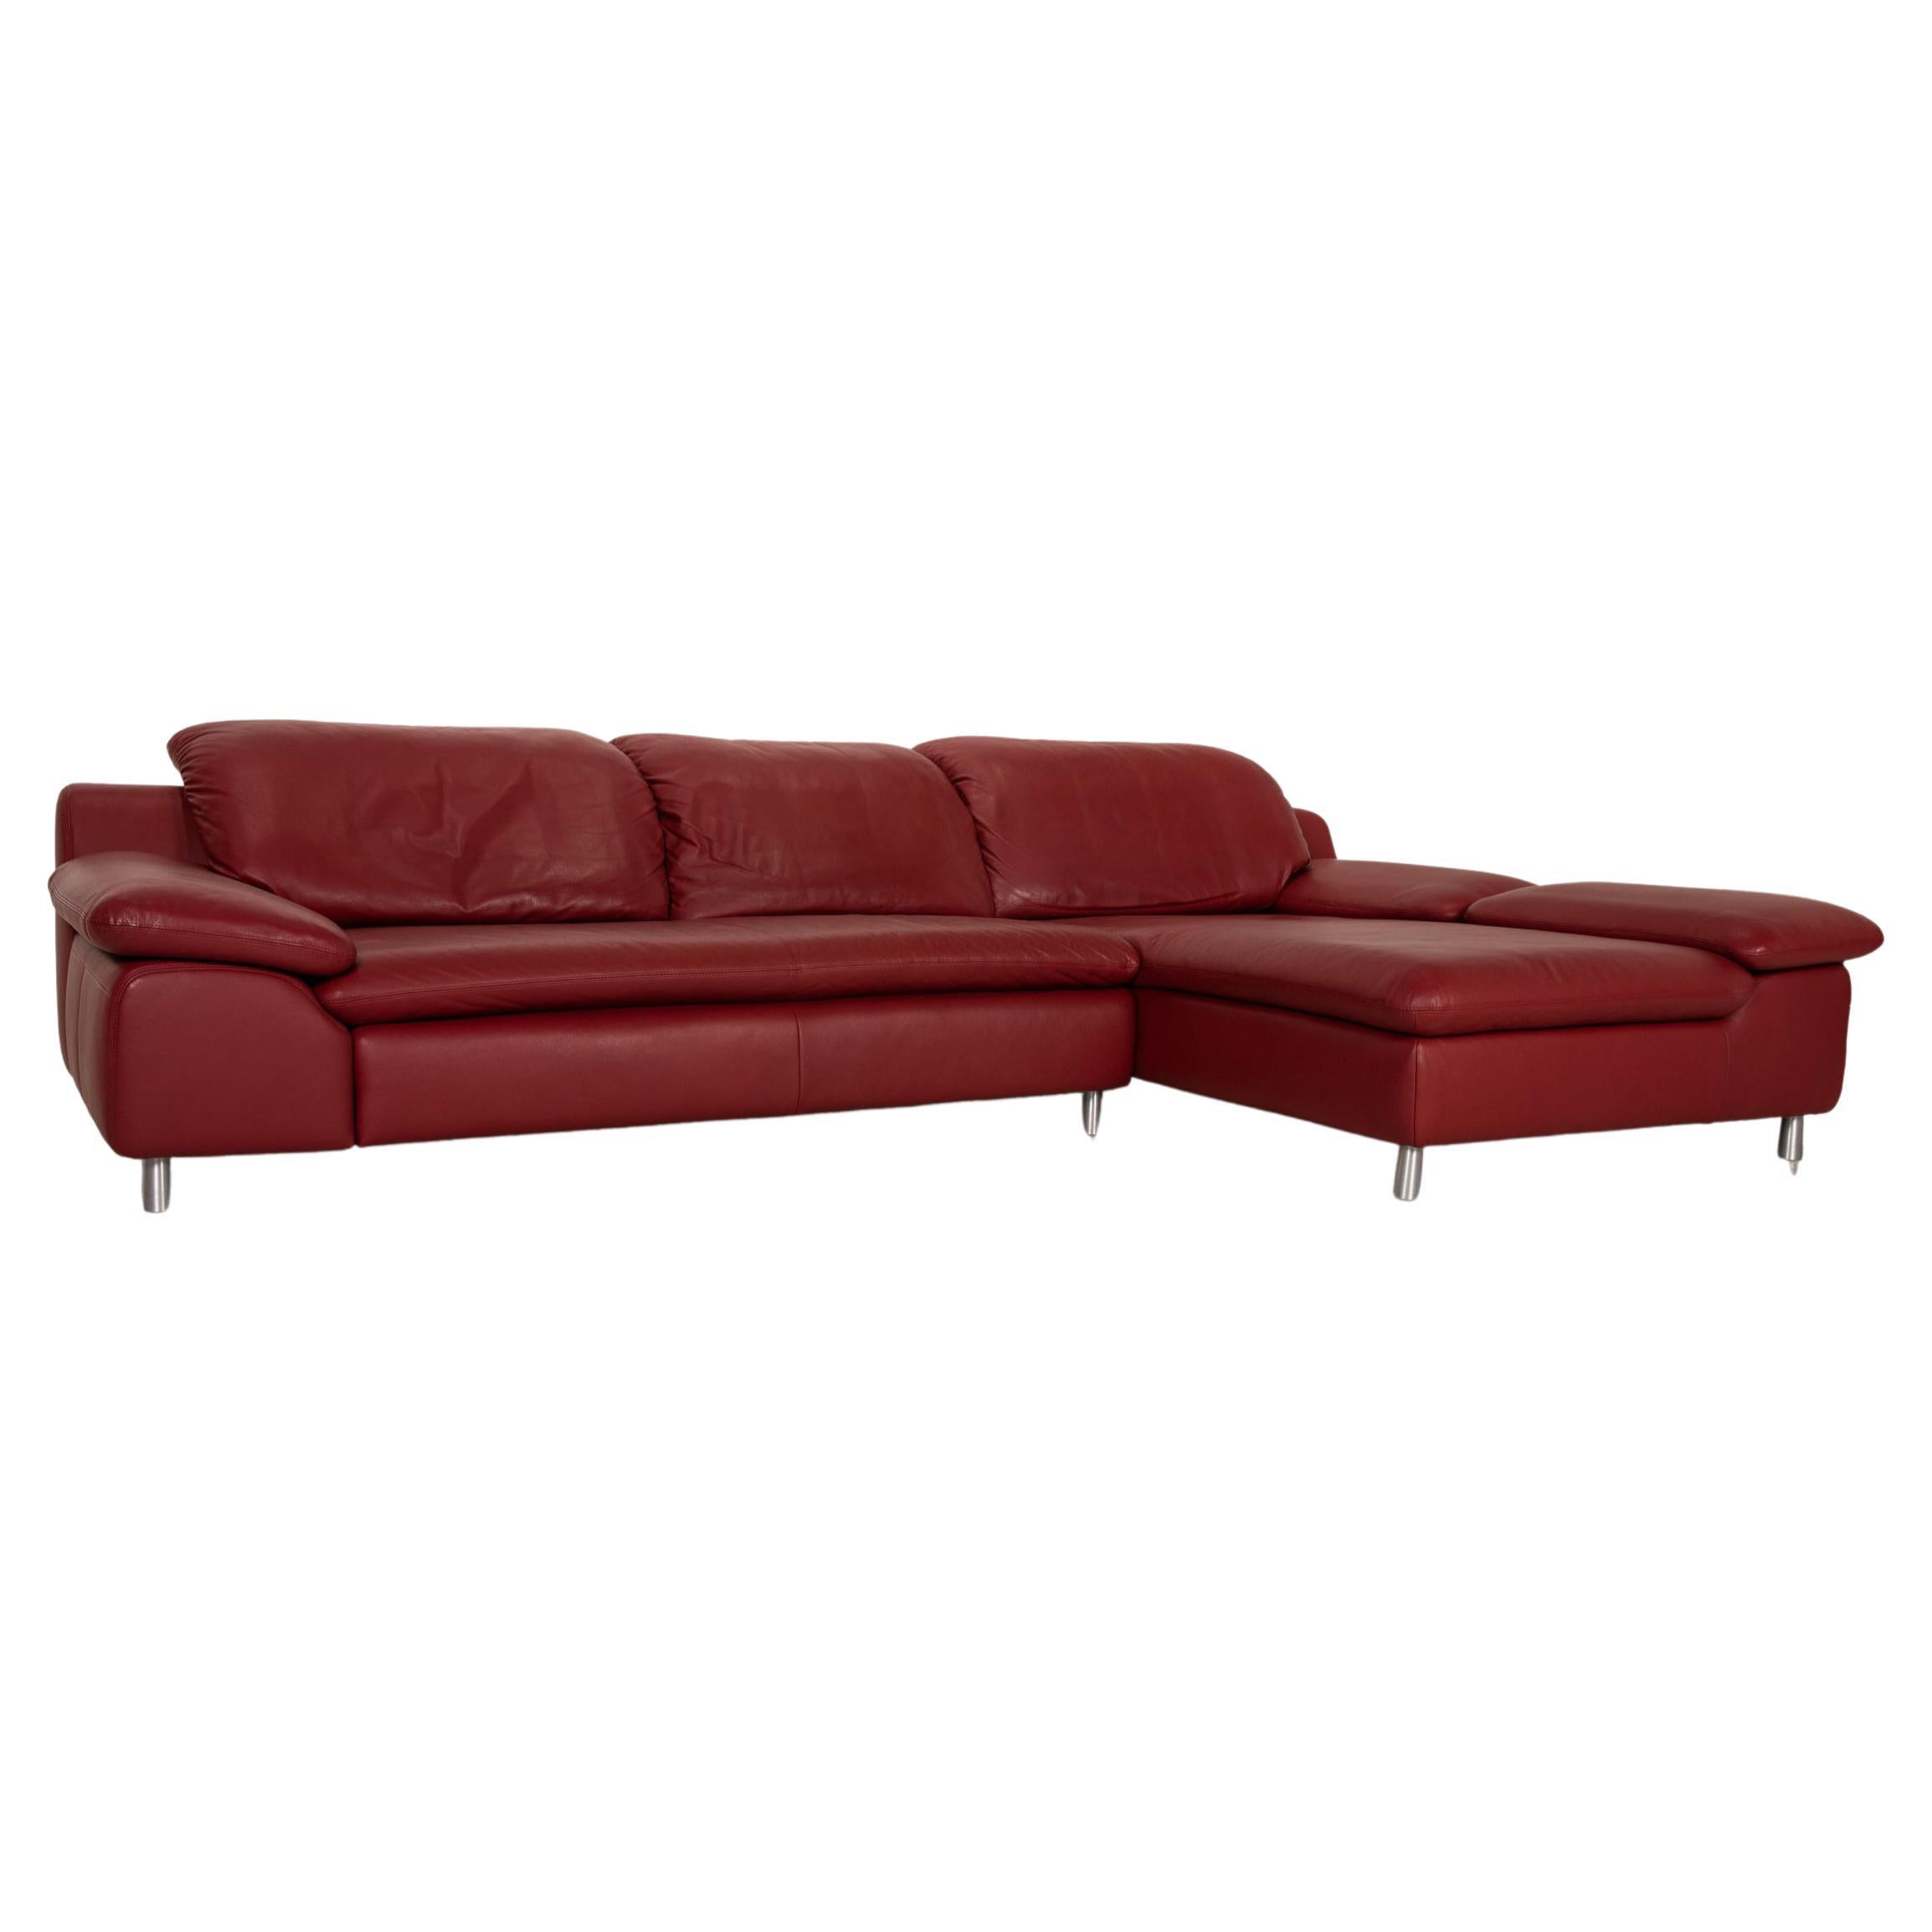 Willi Schillig Amore Leather Sofa Red Corner Sofa Couch Function For Sale